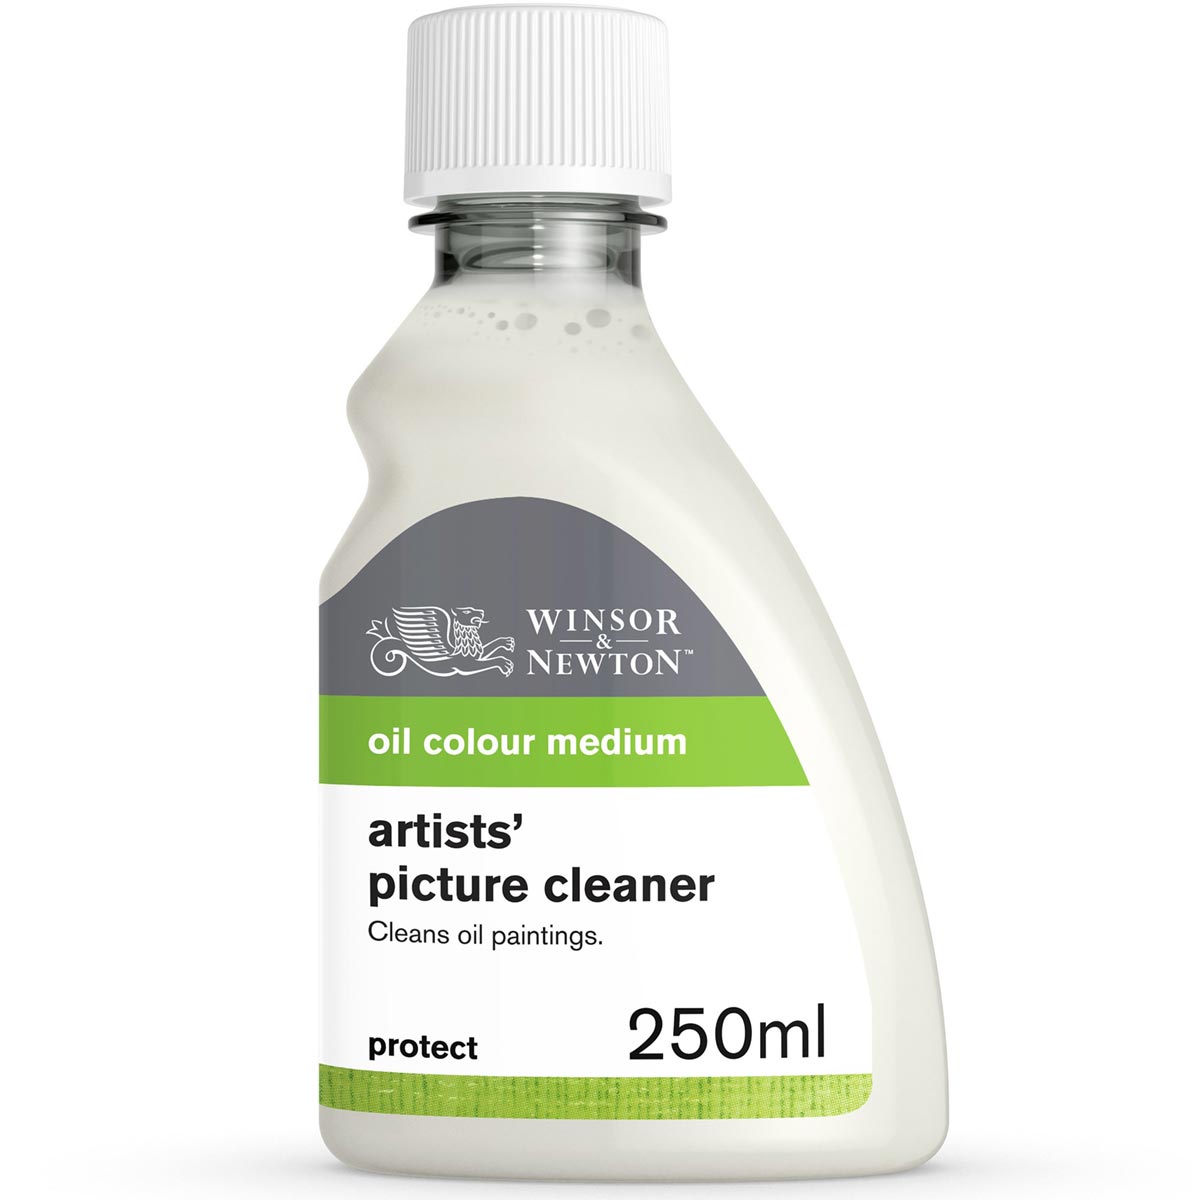 Winsor and Newton - Artists' Picture Cleaner - 250ml